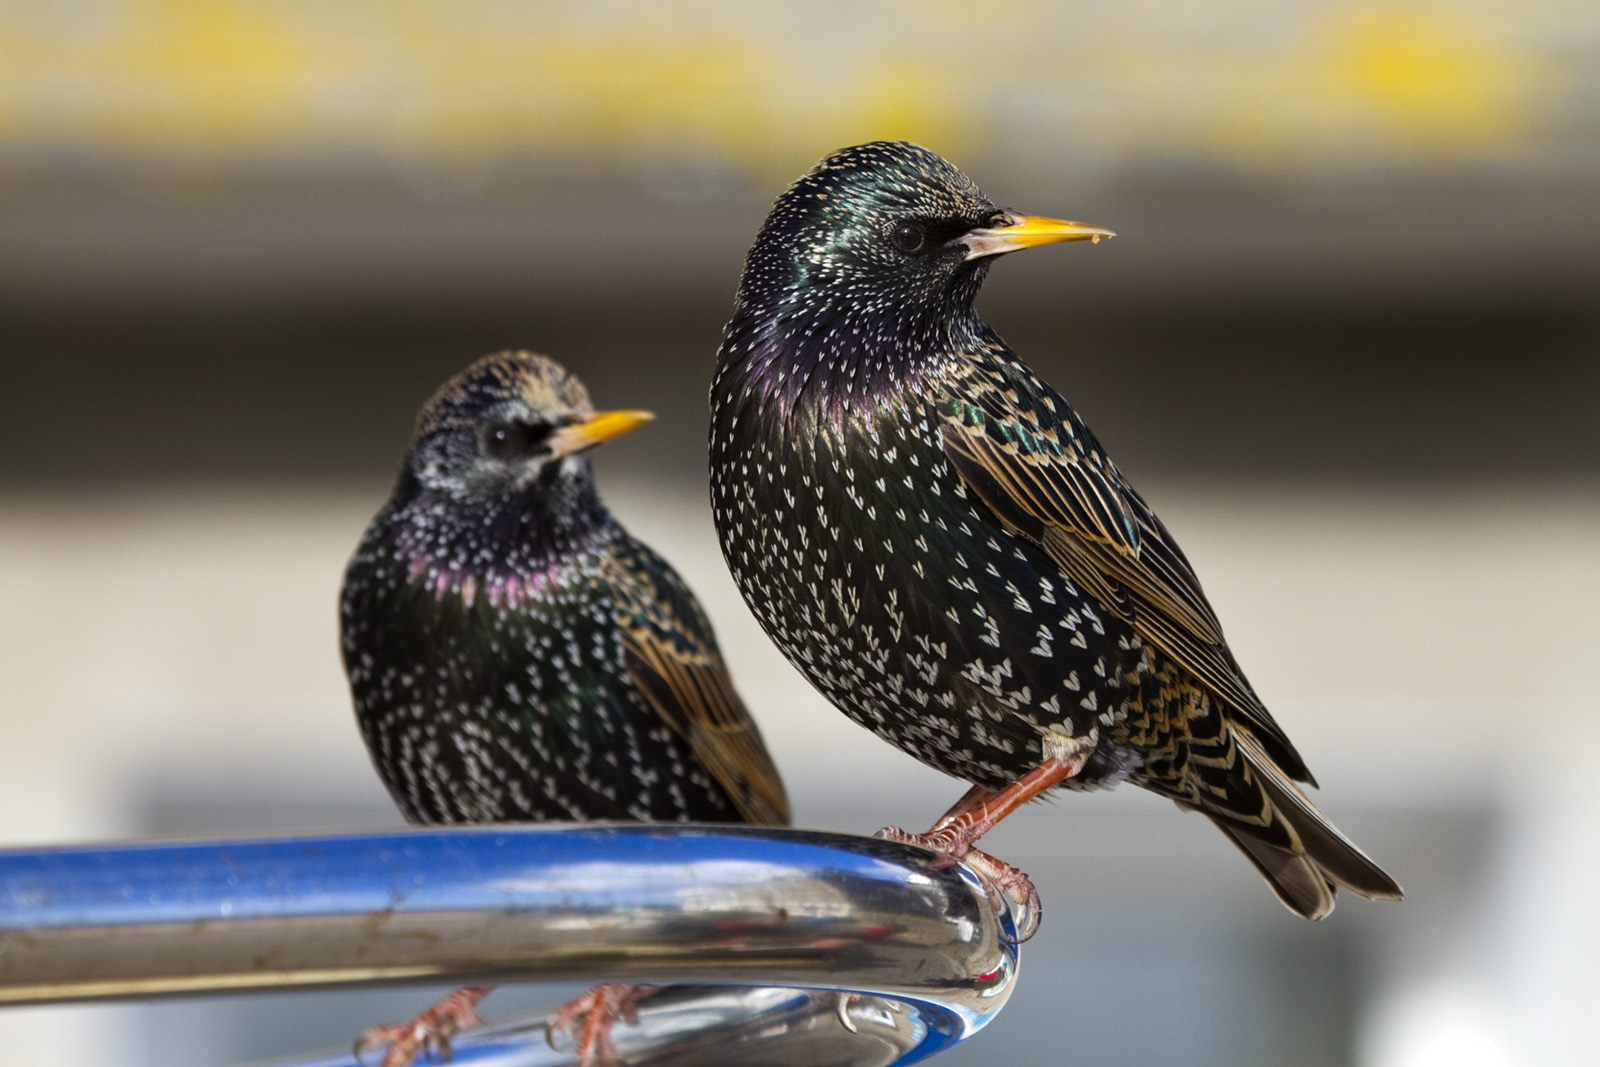 Starlings are colourful and very tame in St Ives. Credit: David Chapman